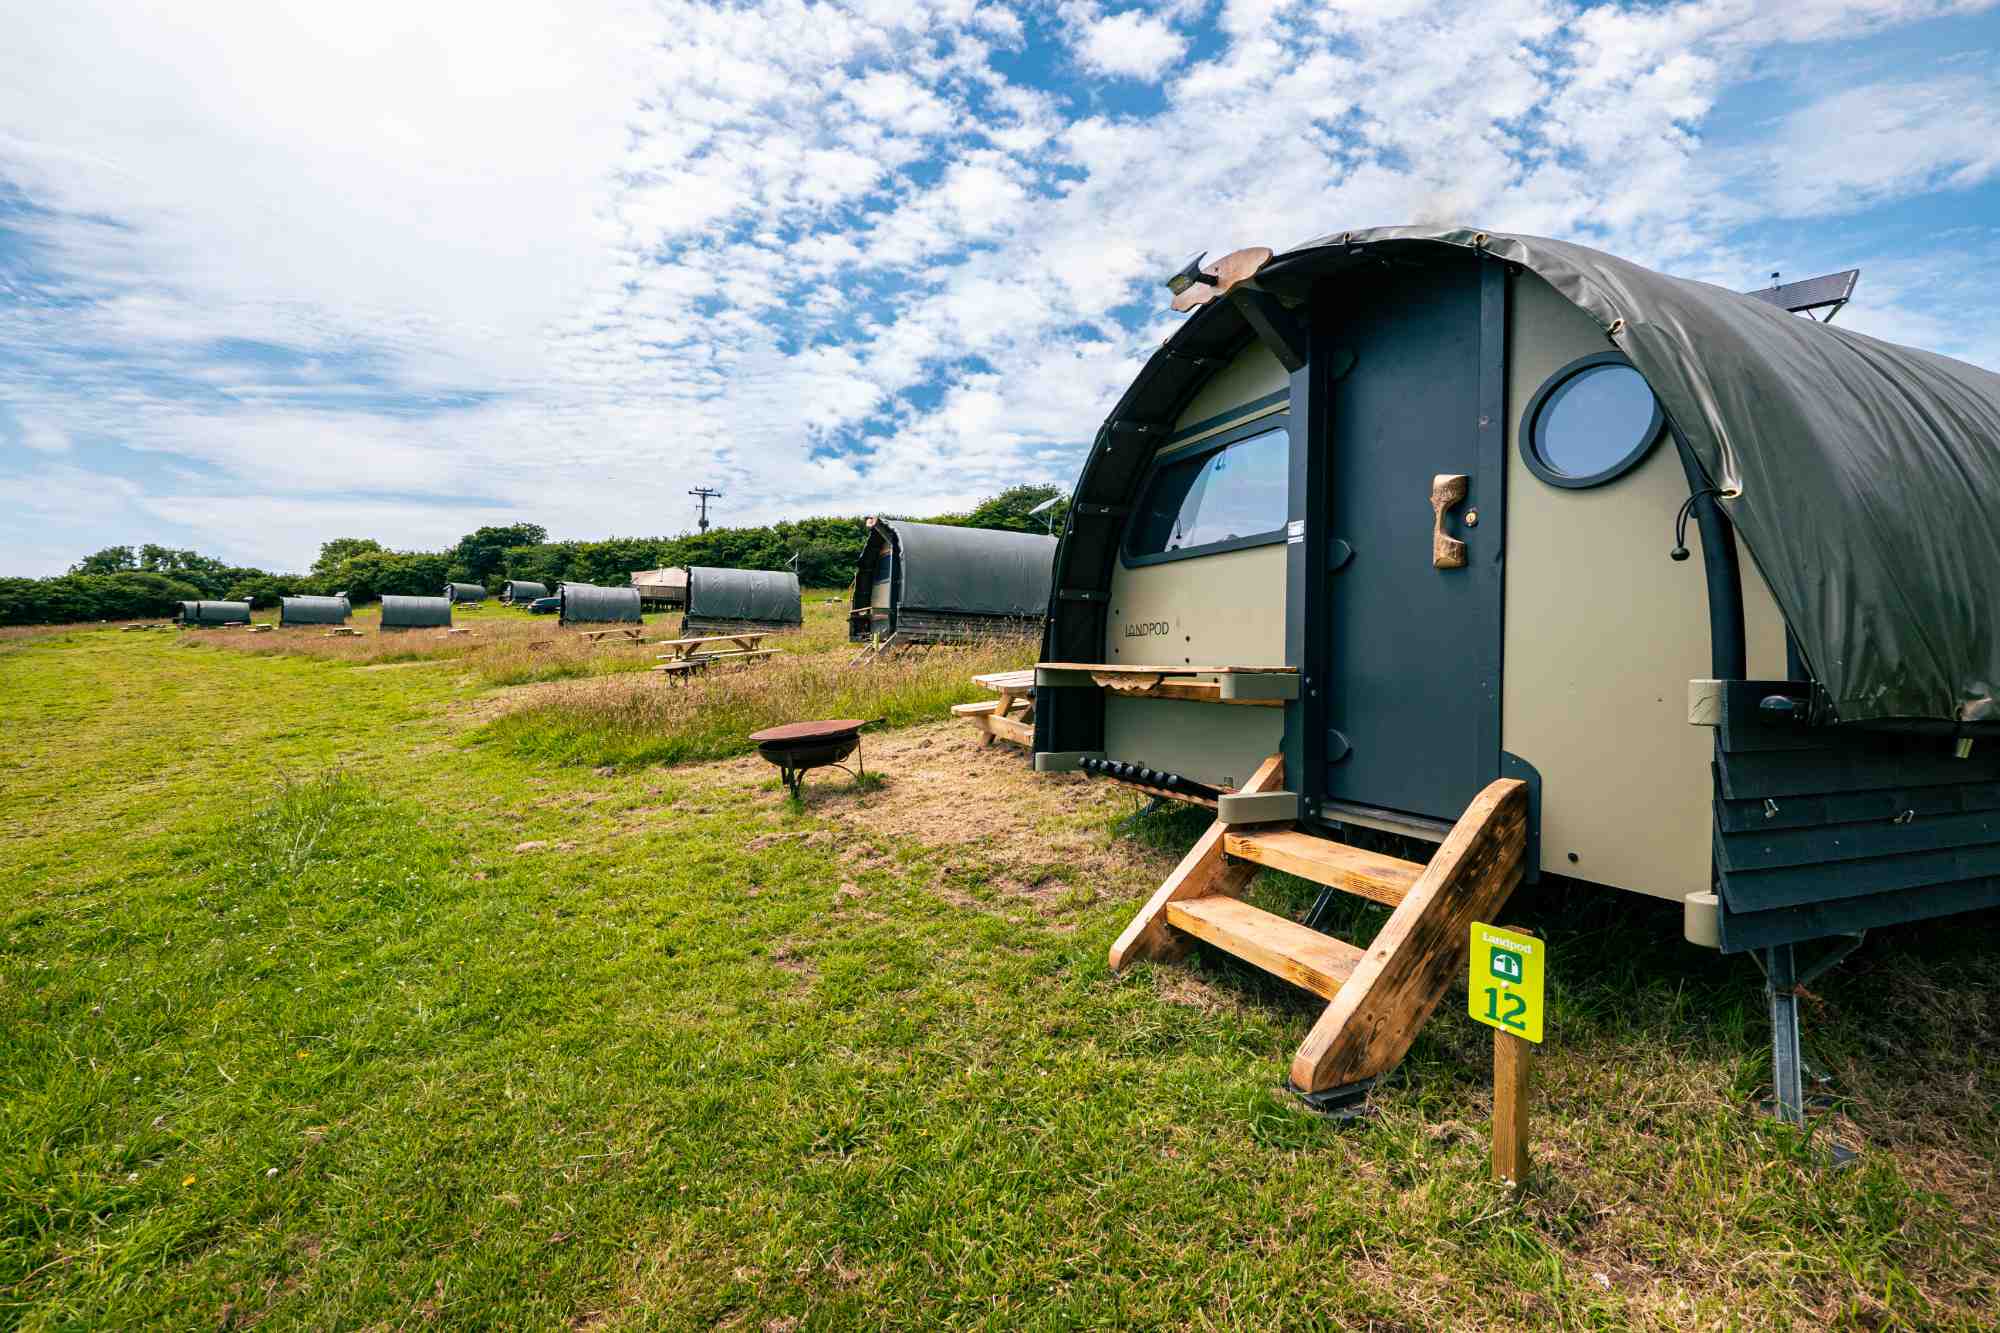 The Landpods in the grounds of YHA Eden Project